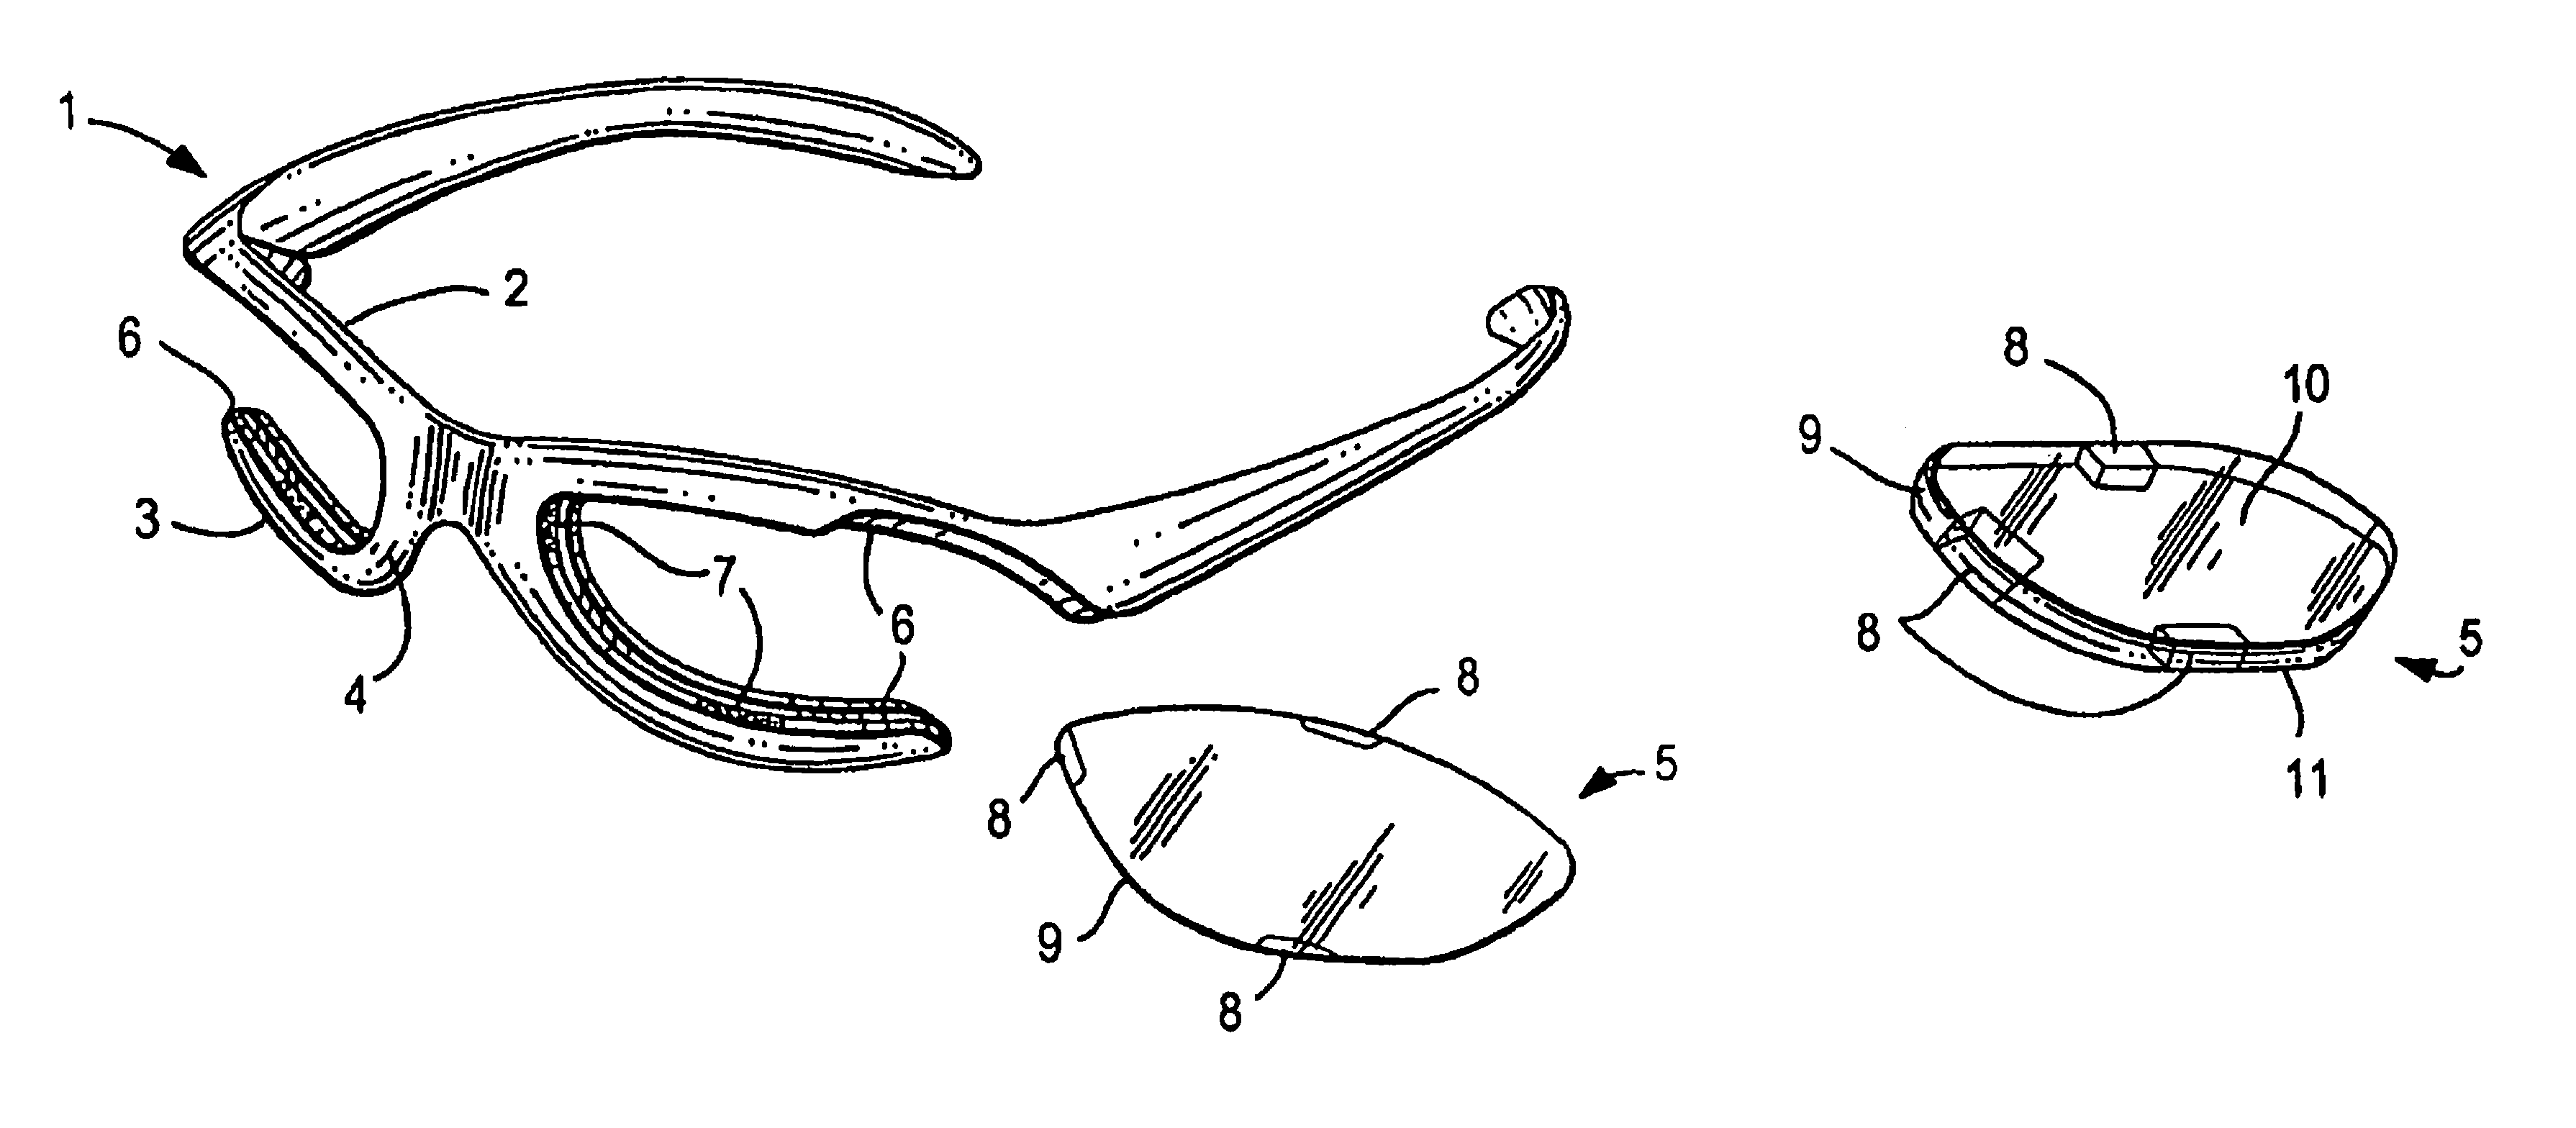 Eyewear frames with magnetic lens attachements